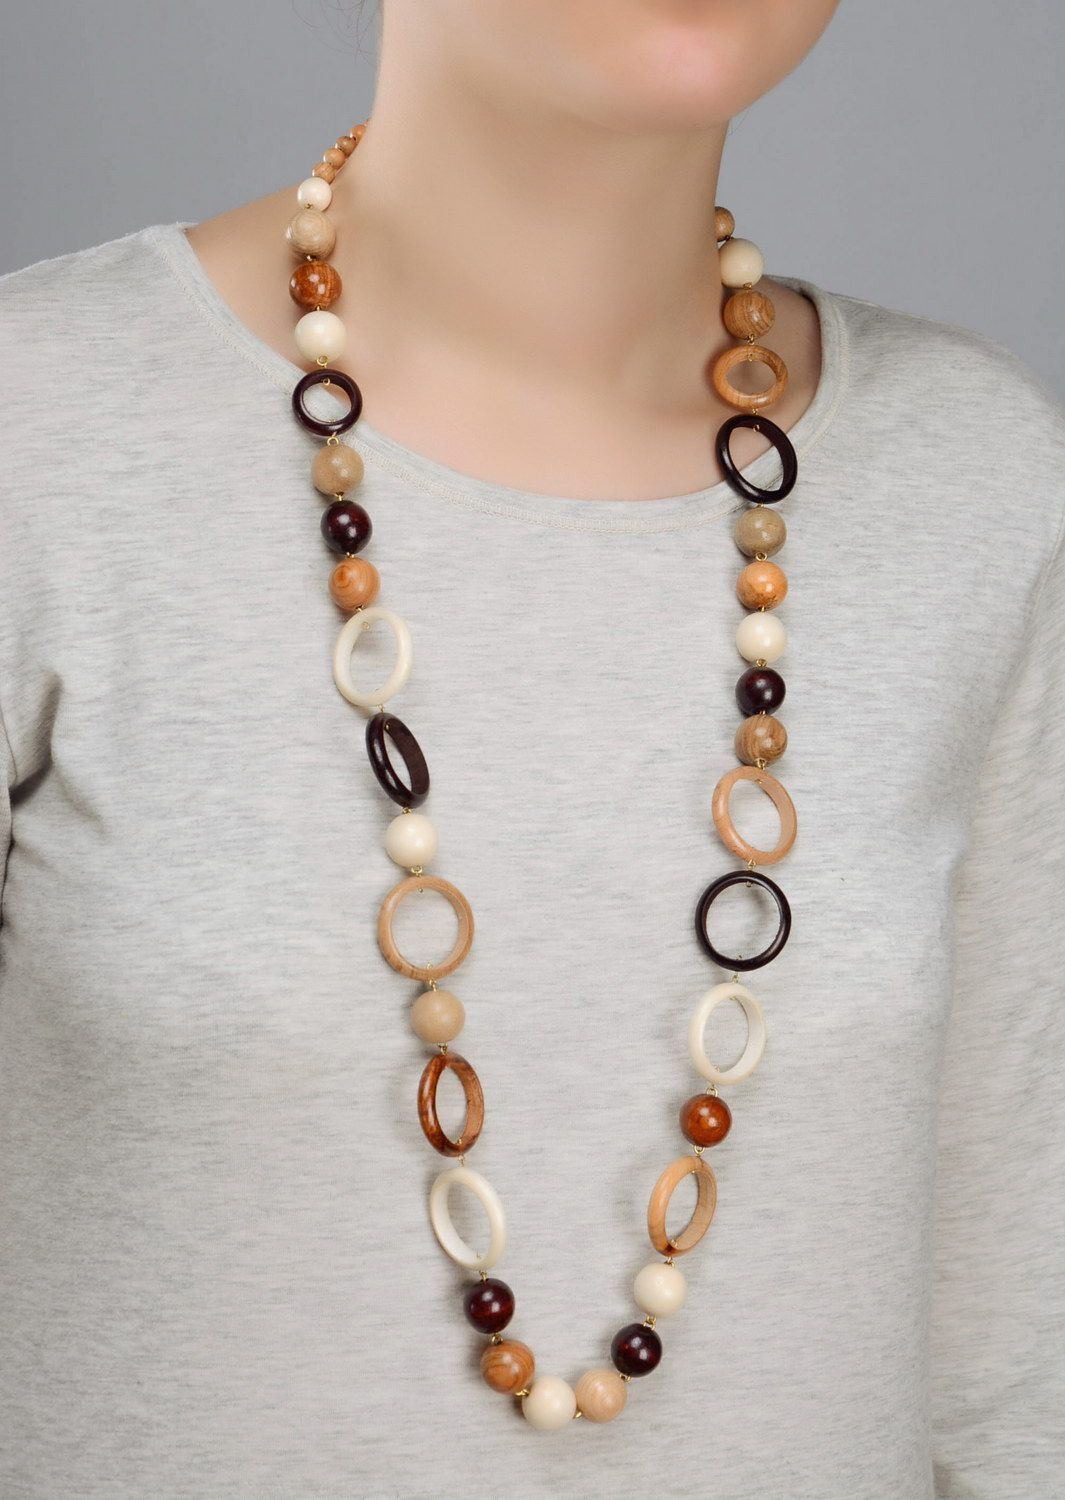 Wooden bead necklace photo 3